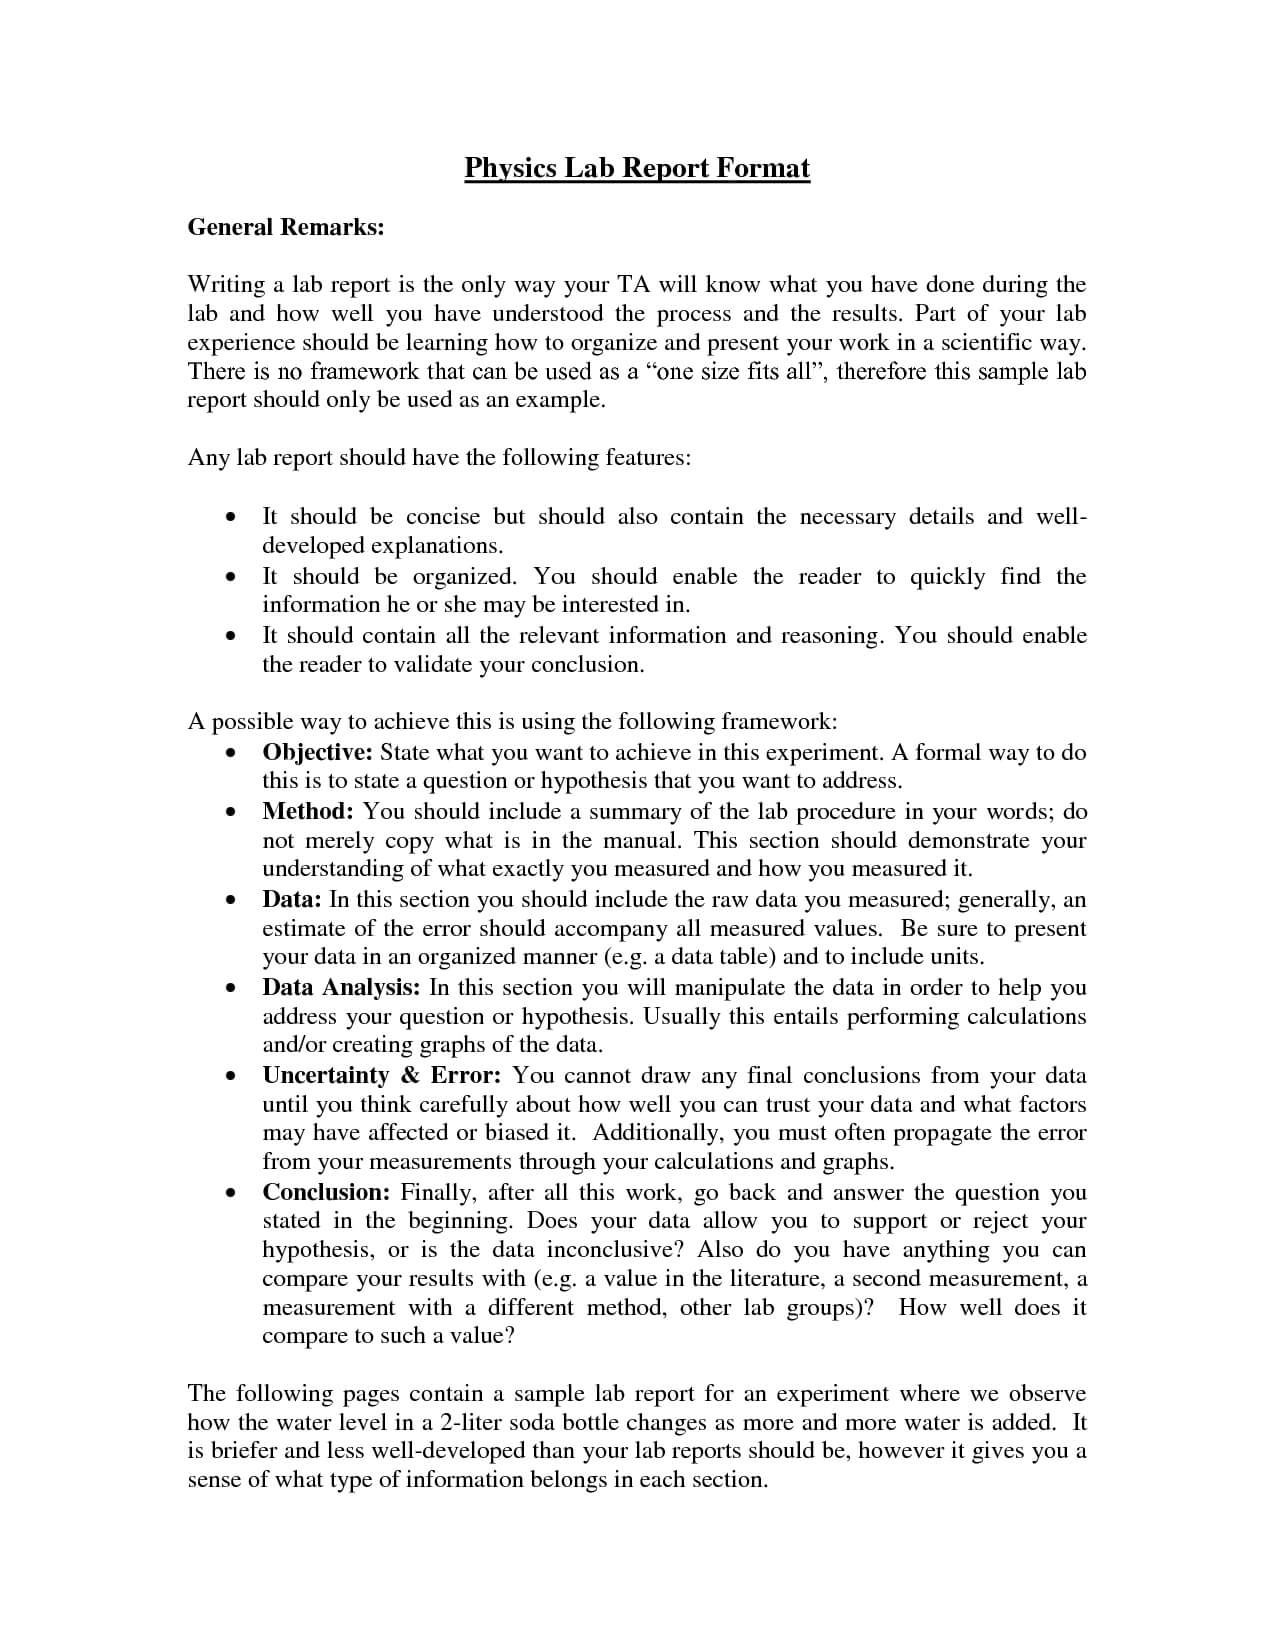 Formal Lab Report Example Writing Physics At High School In Physics Lab Report Template